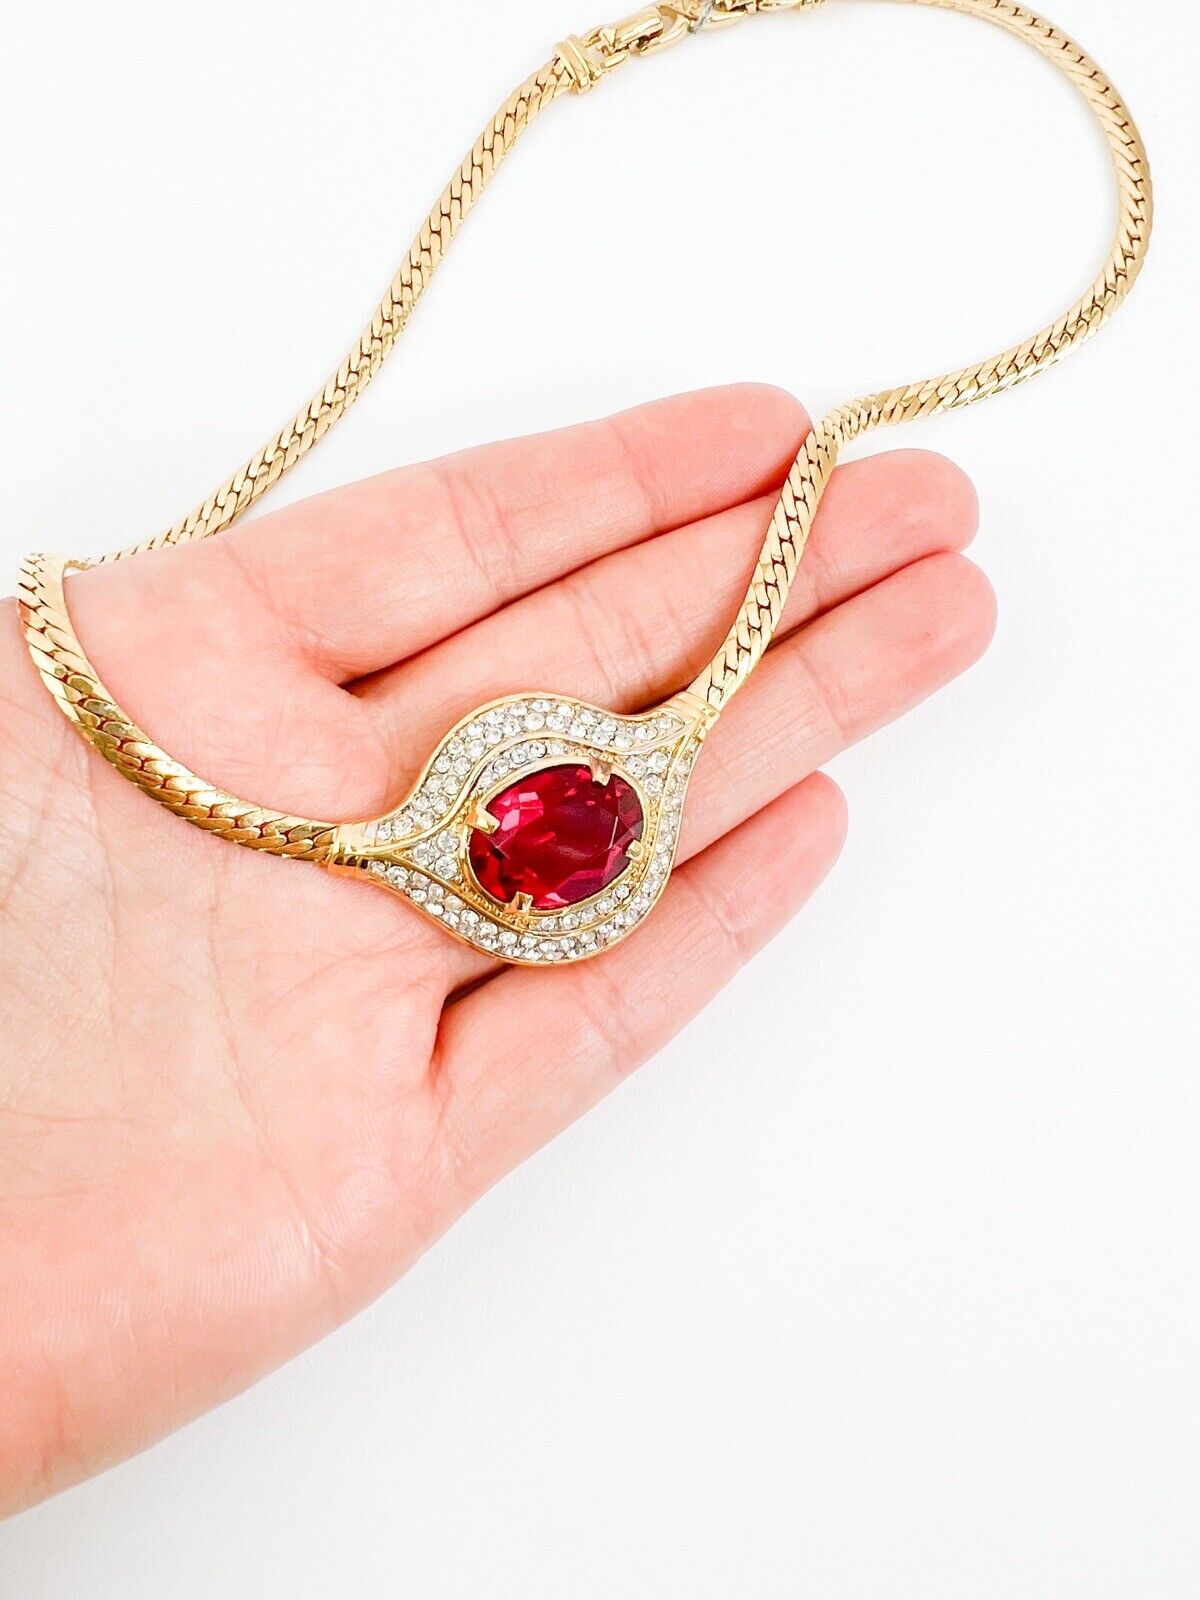 Vintage Nina Ricci Necklace, Gold Tone Necklace, Choker Necklace, Ruby necklace, Vintage Rhinestone, Jewelry for Women, Personalized Gifts